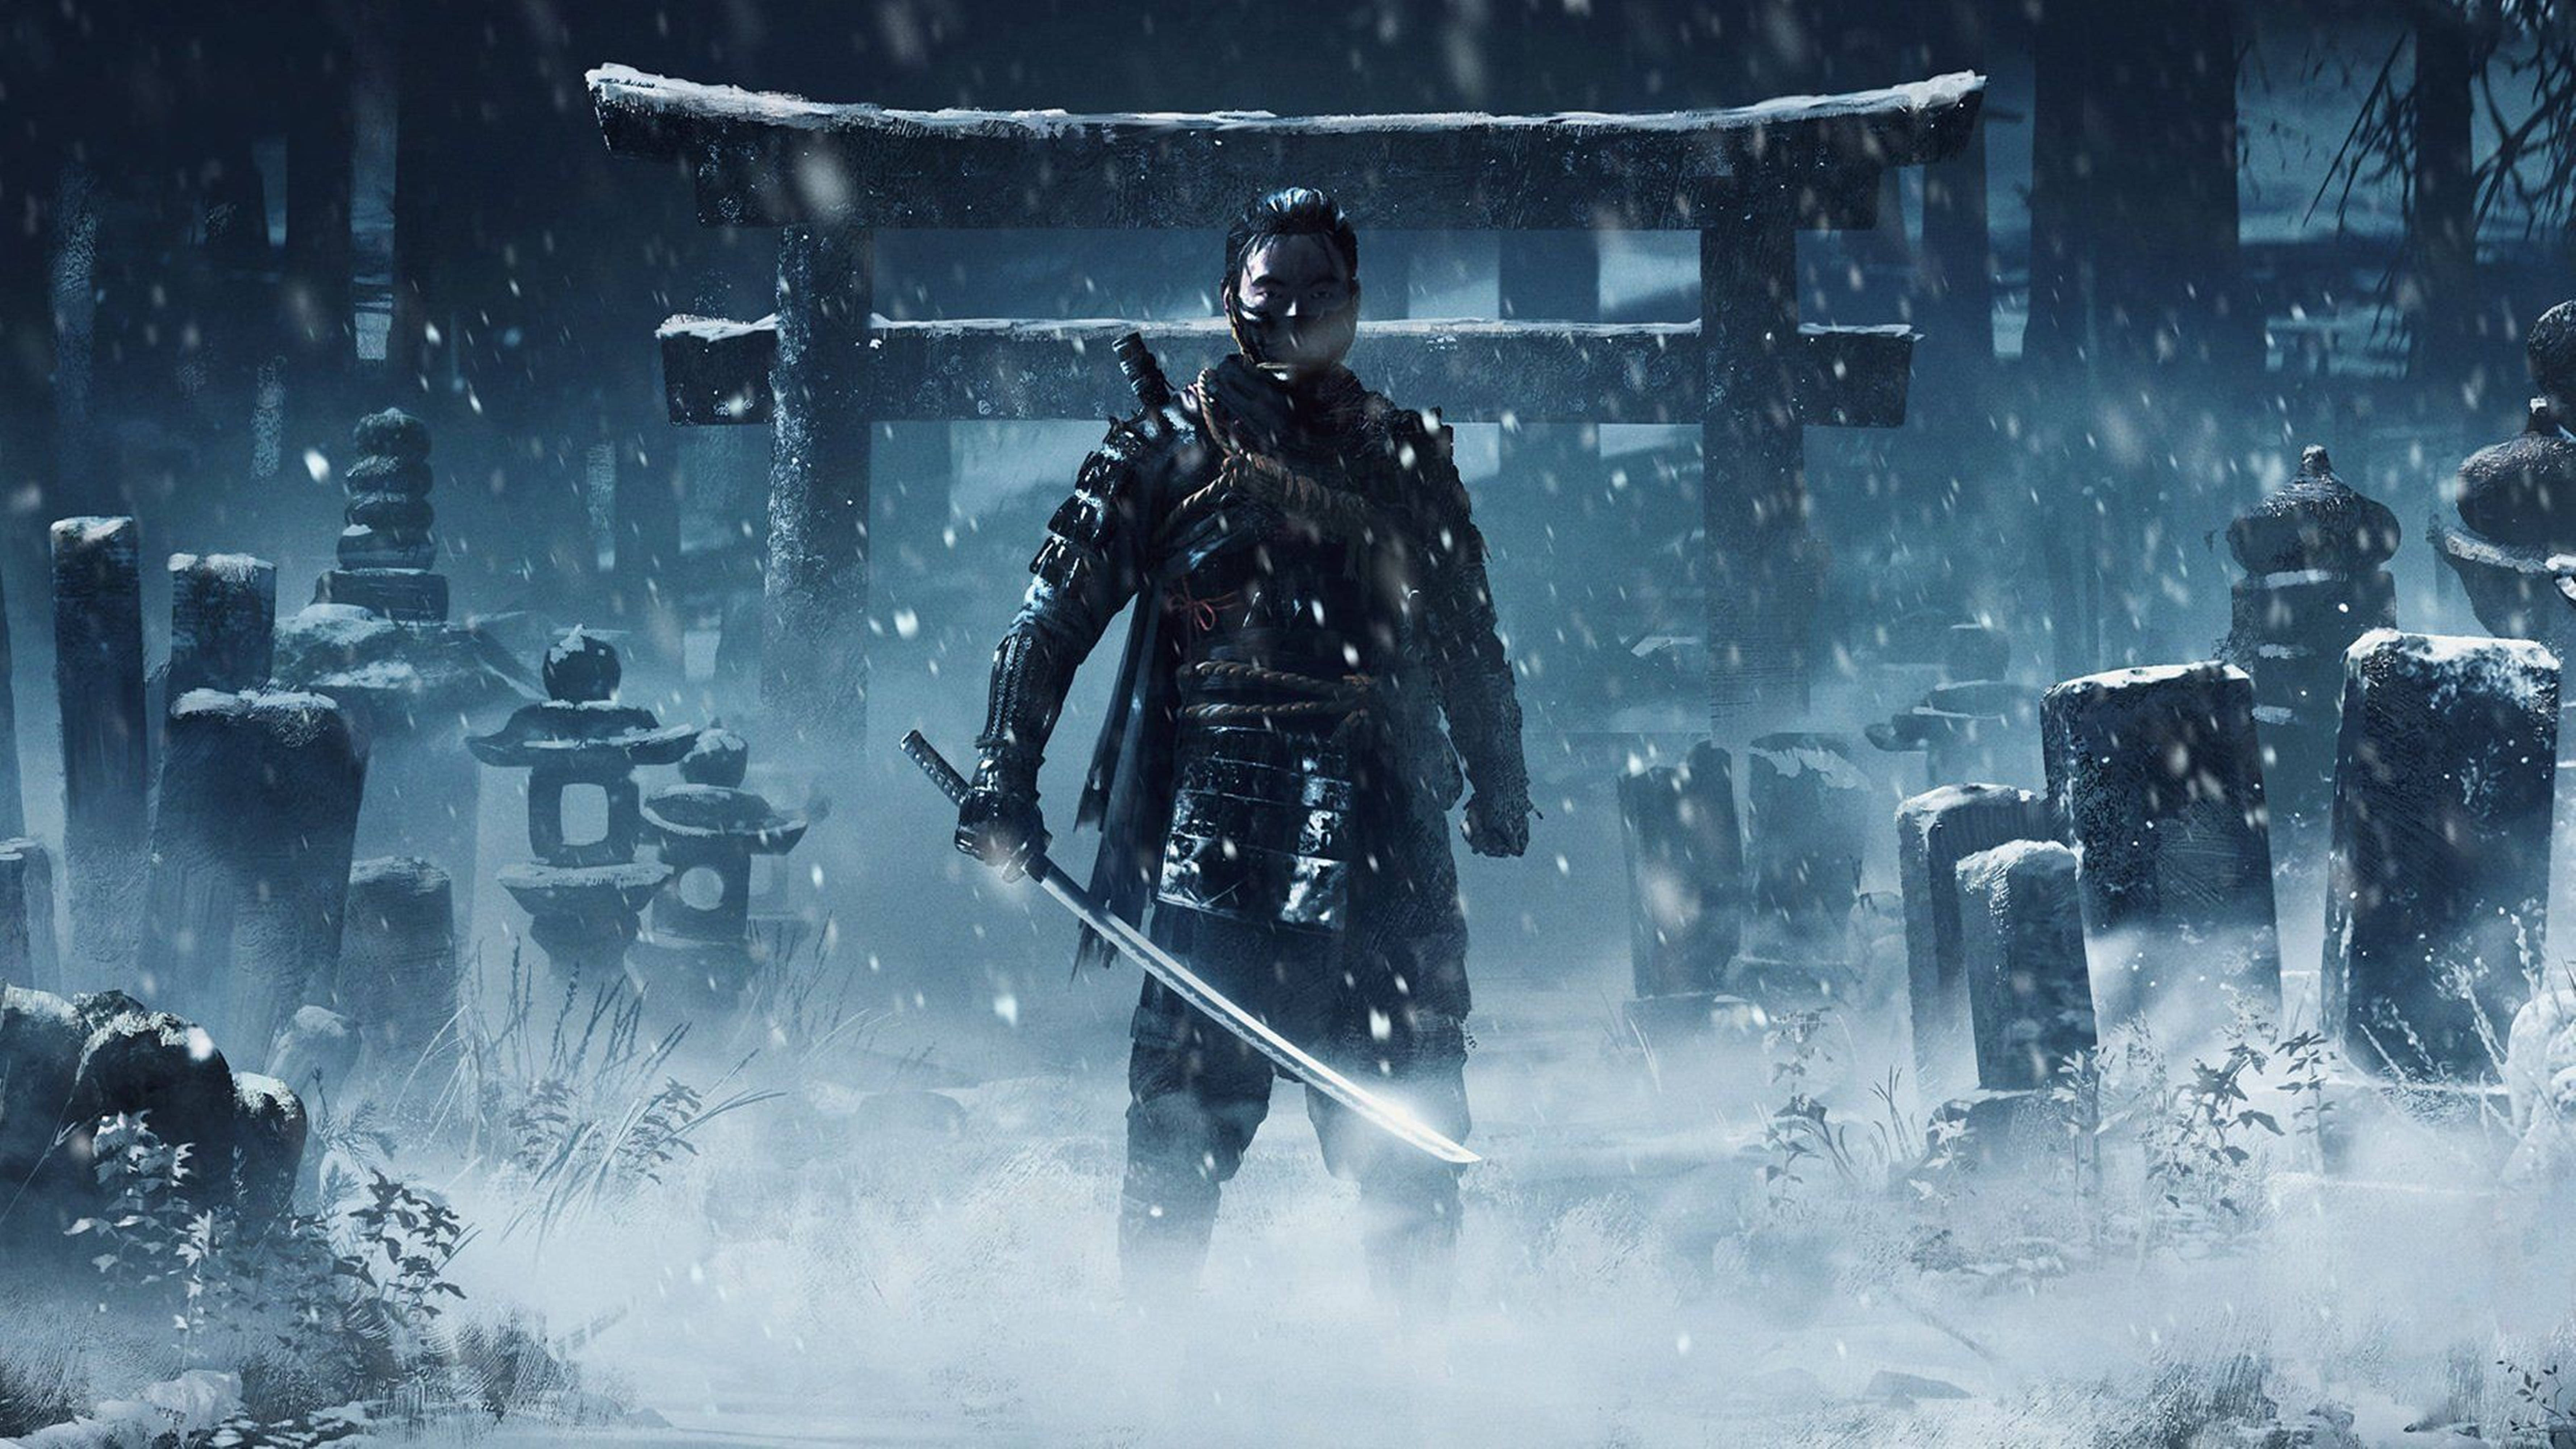 Top 999+ Ghost Of Tsushima 4k Wallpapers Full HD, 4K✅Free to Use